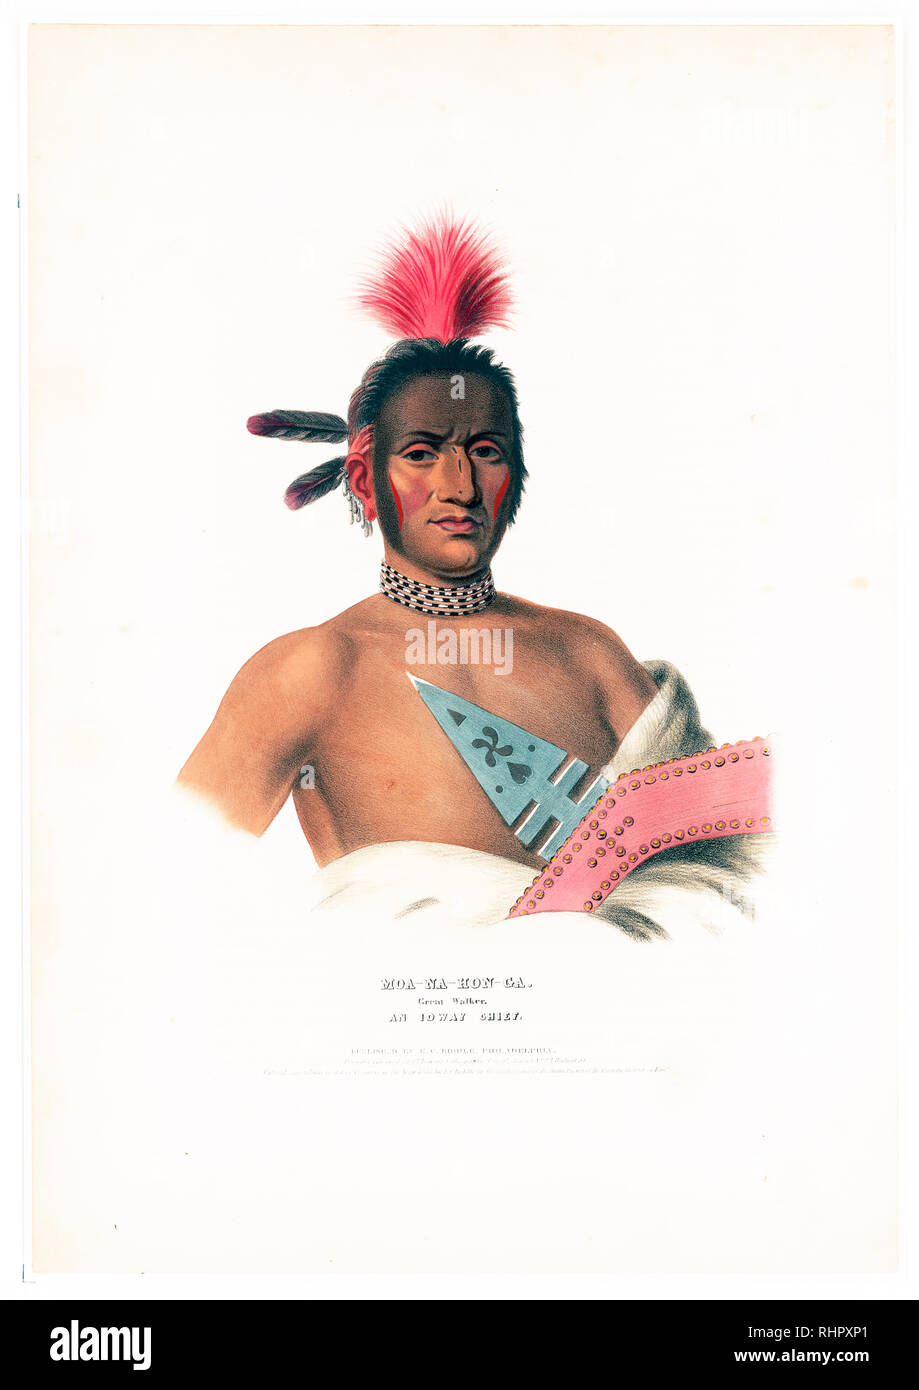 Print shows Moa-Na-Hon-Ga, half-length portrait, facing front, wearing many earrings and bead necklaces Stock Photo